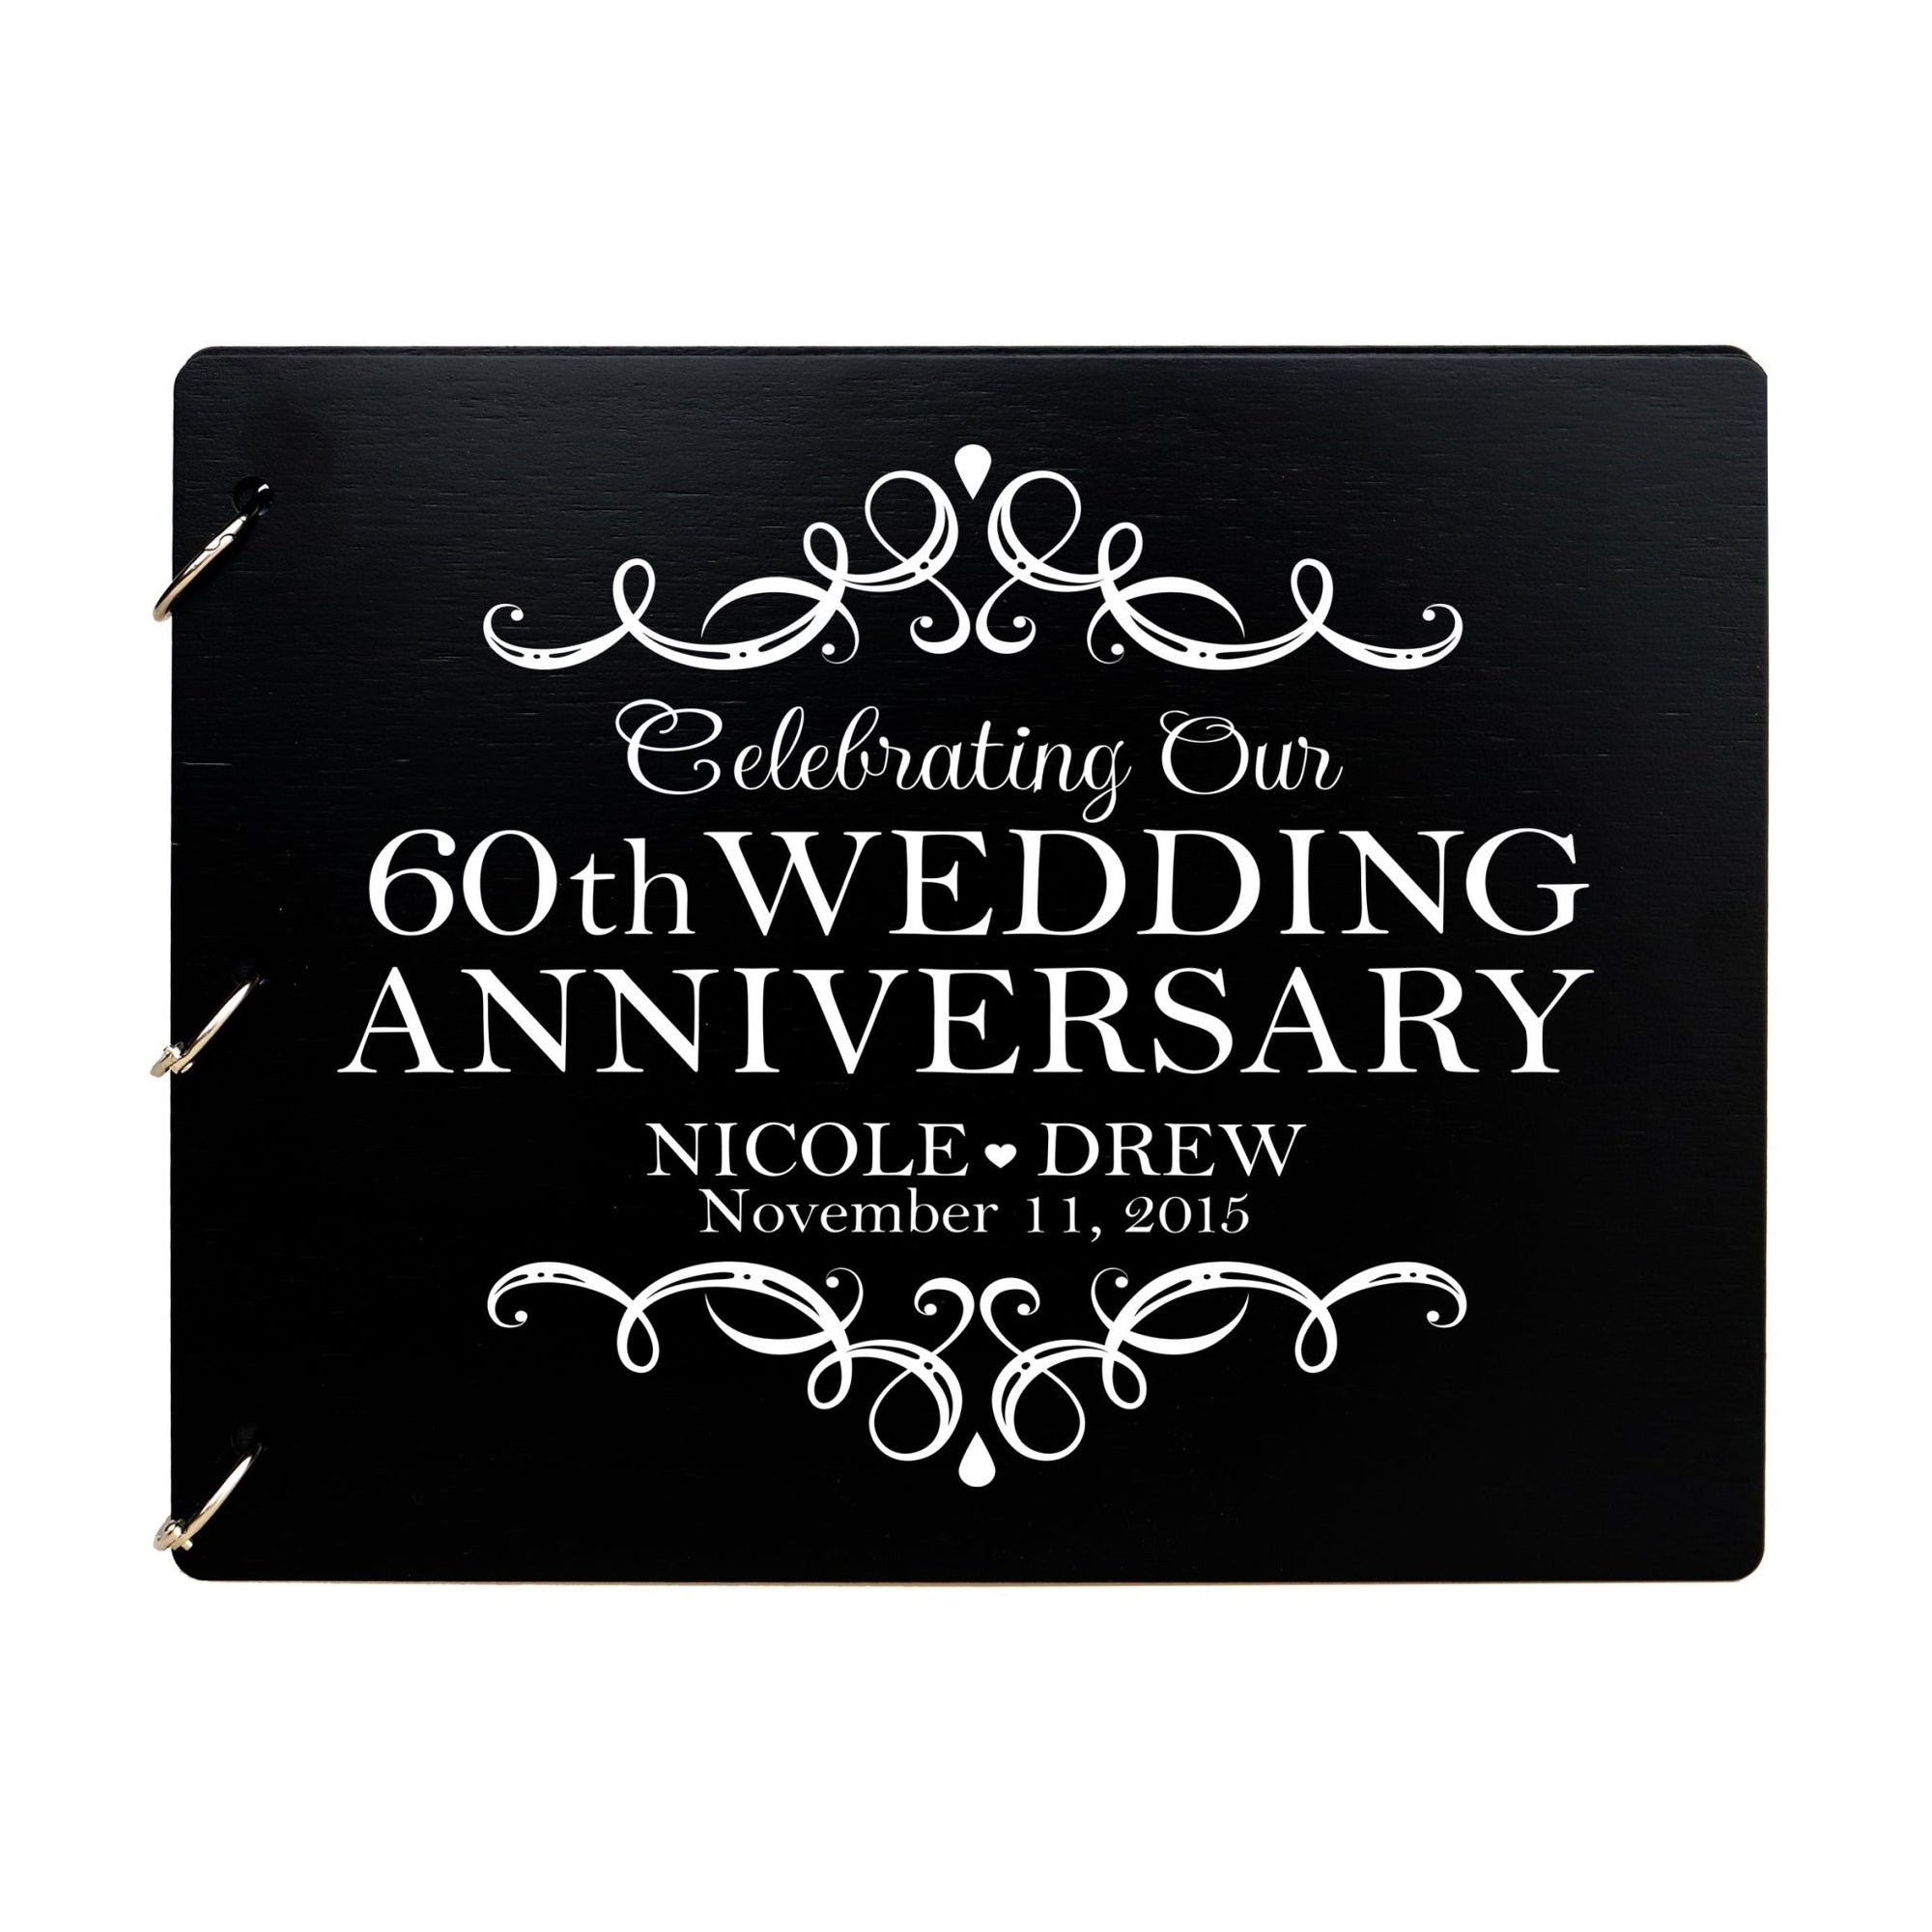 Personalized 60th Wedding Anniversary Guestbook - LifeSong Milestones